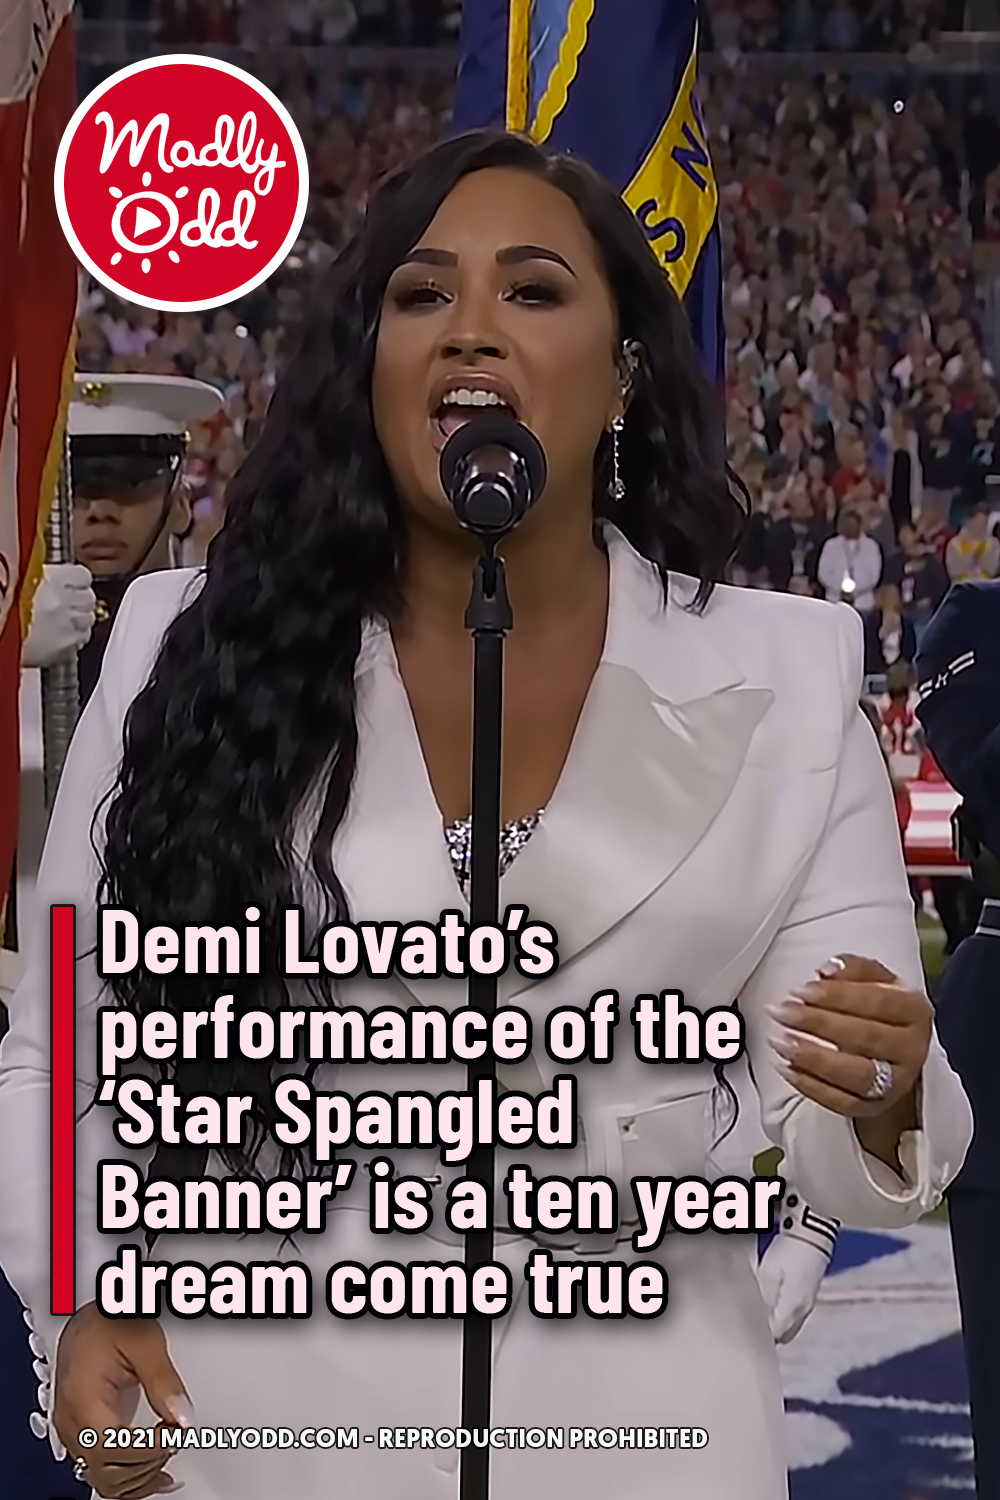 Demi Lovato’s performance of the ‘Star Spangled Banner’ is a ten year dream come true